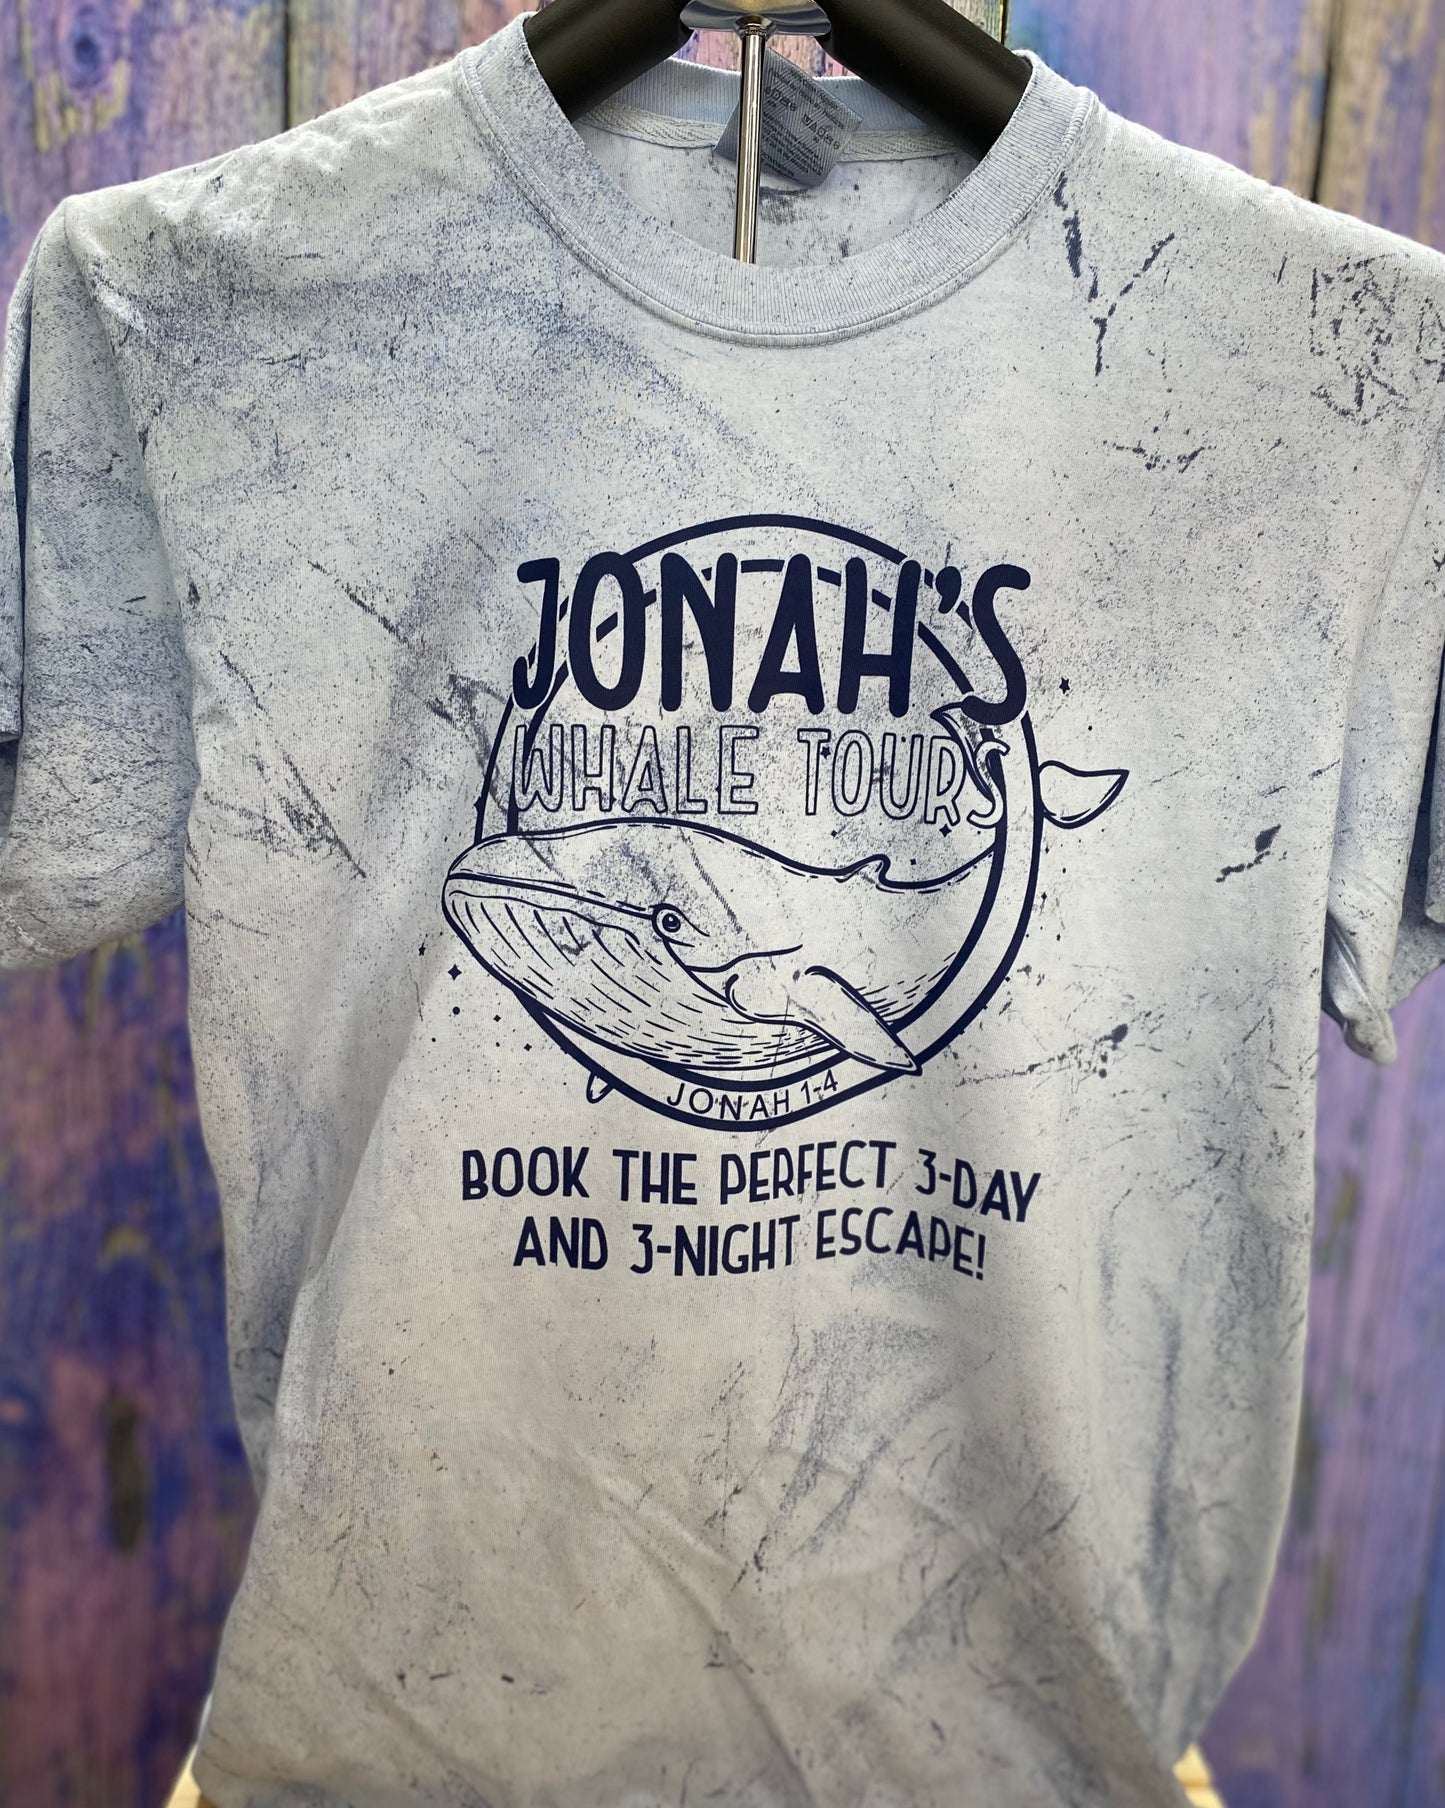 Jonah’s Whale Tours ComfortColors Tee - Large